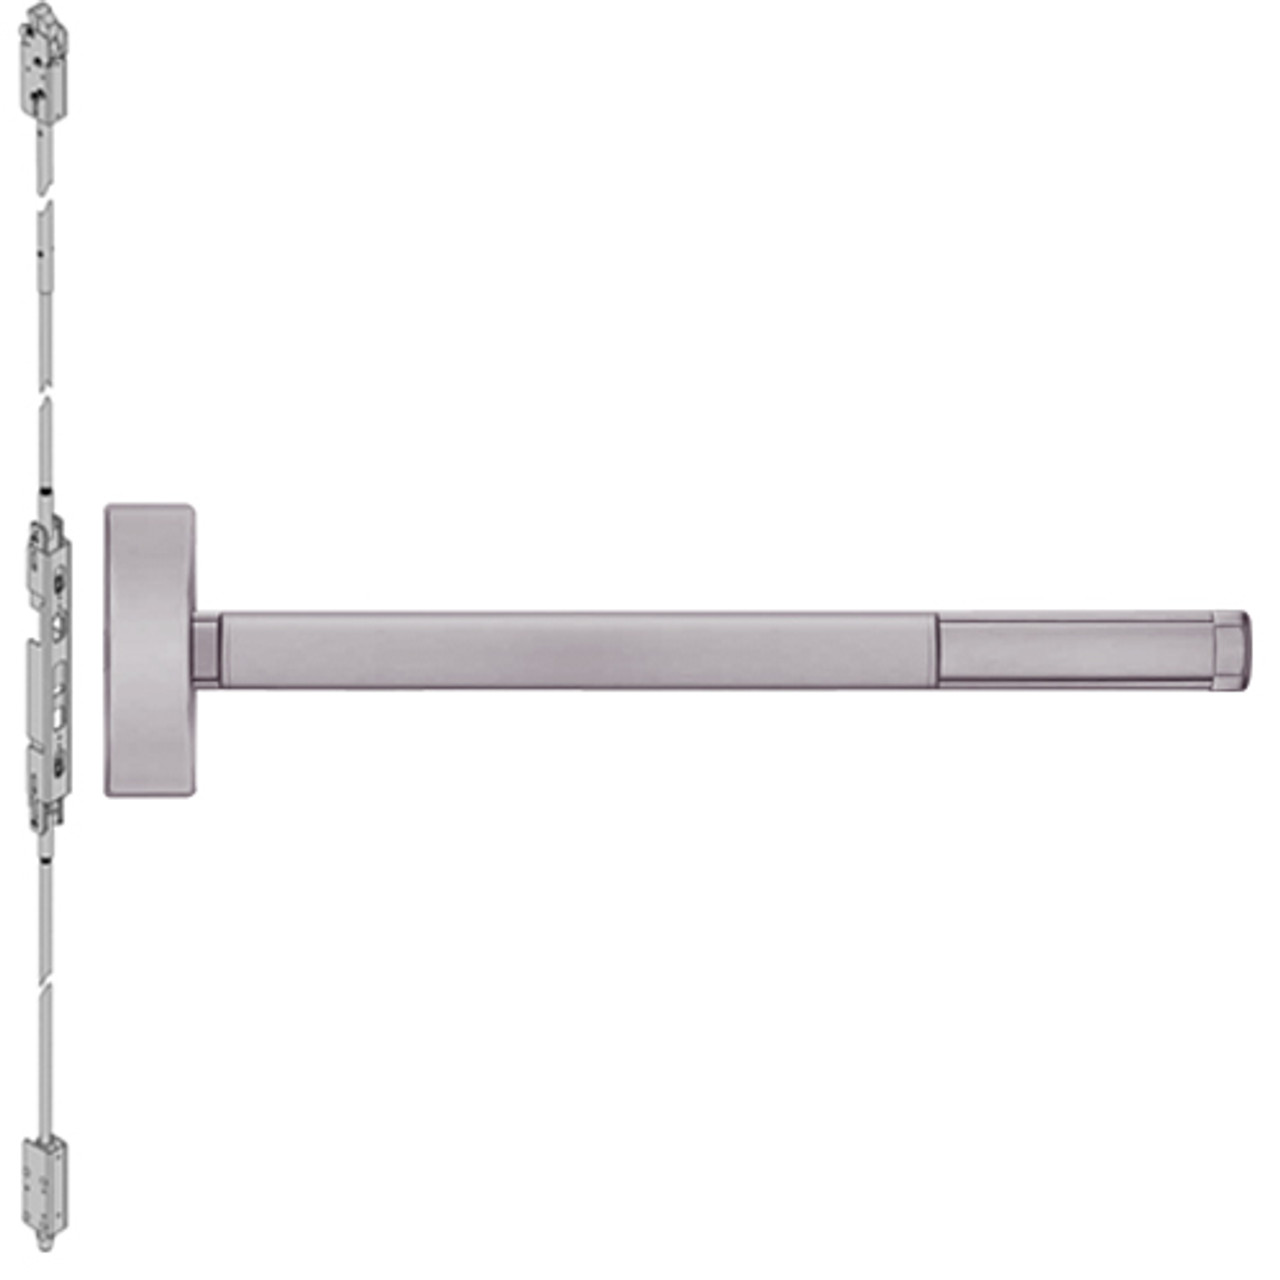 DE2802-630-36 PHI 2800 Series Concealed Vertical Rod Exit Device with Delayed Egress Prepped for Dummy Trim in Satin Stainless Steel Finish